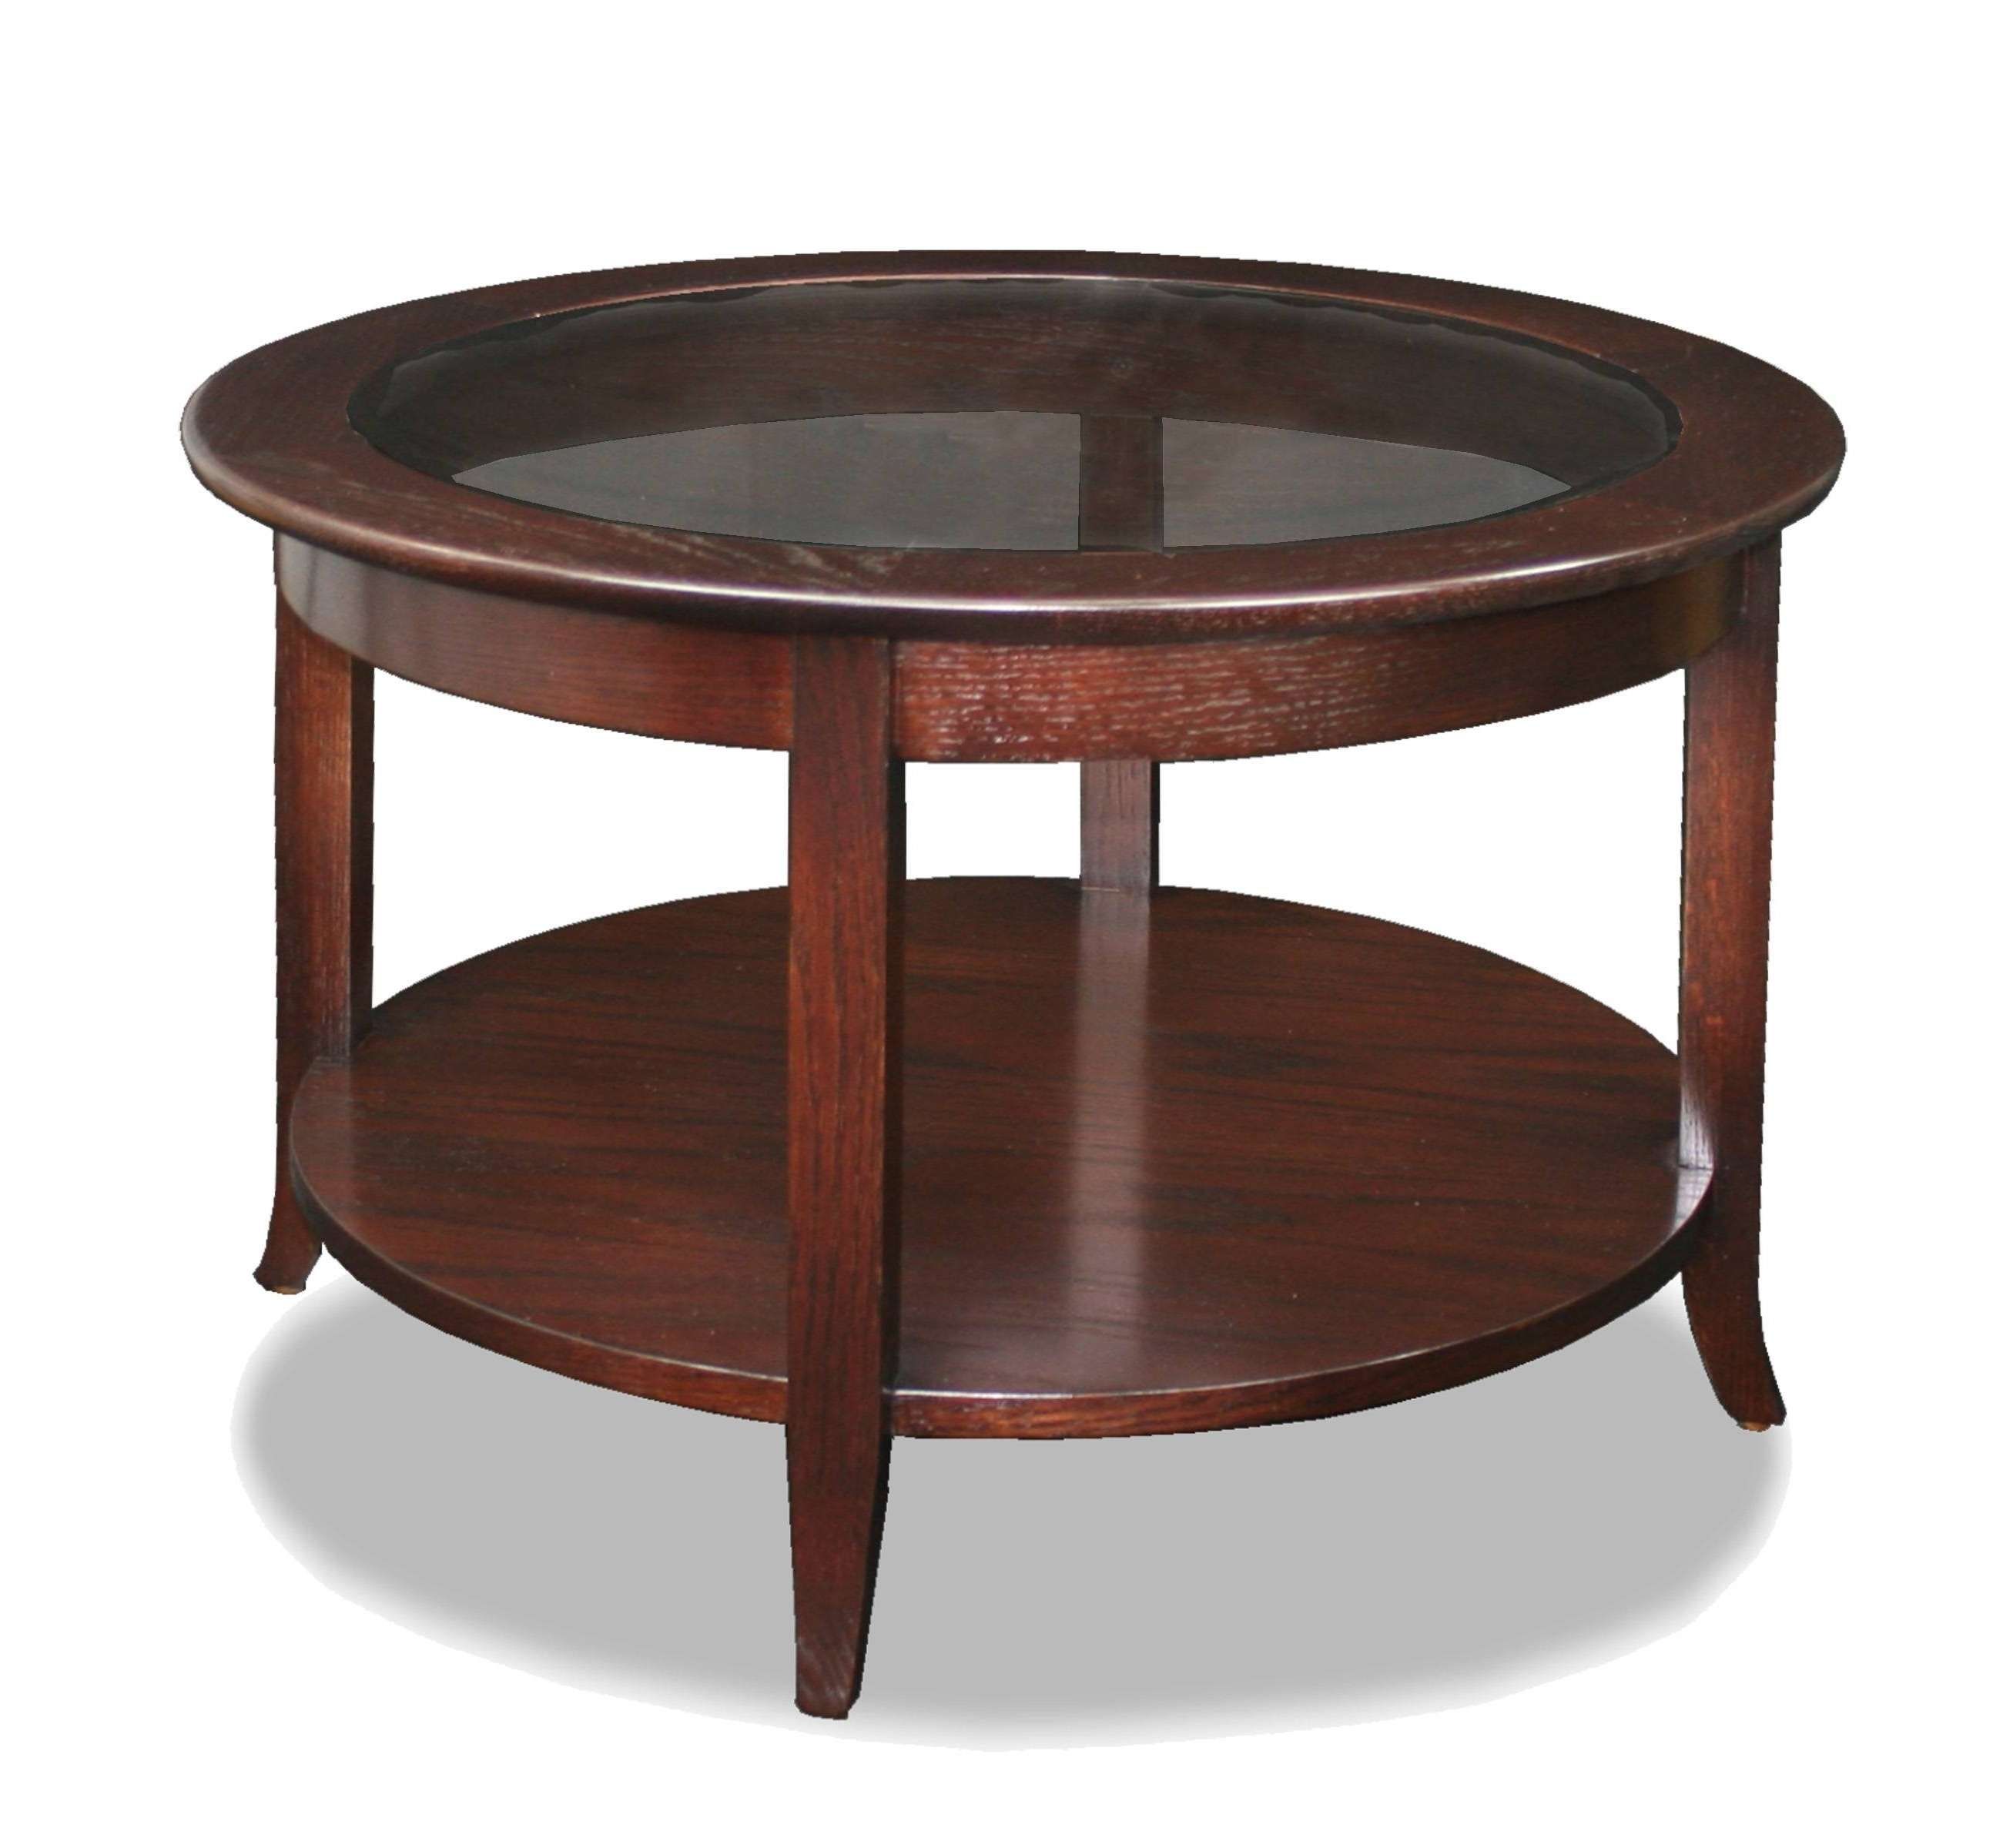 Newest Rounded Corner Coffee Tables With Rounded Corner Coffee Table • Round Table Ideas (Gallery 12 of 20)